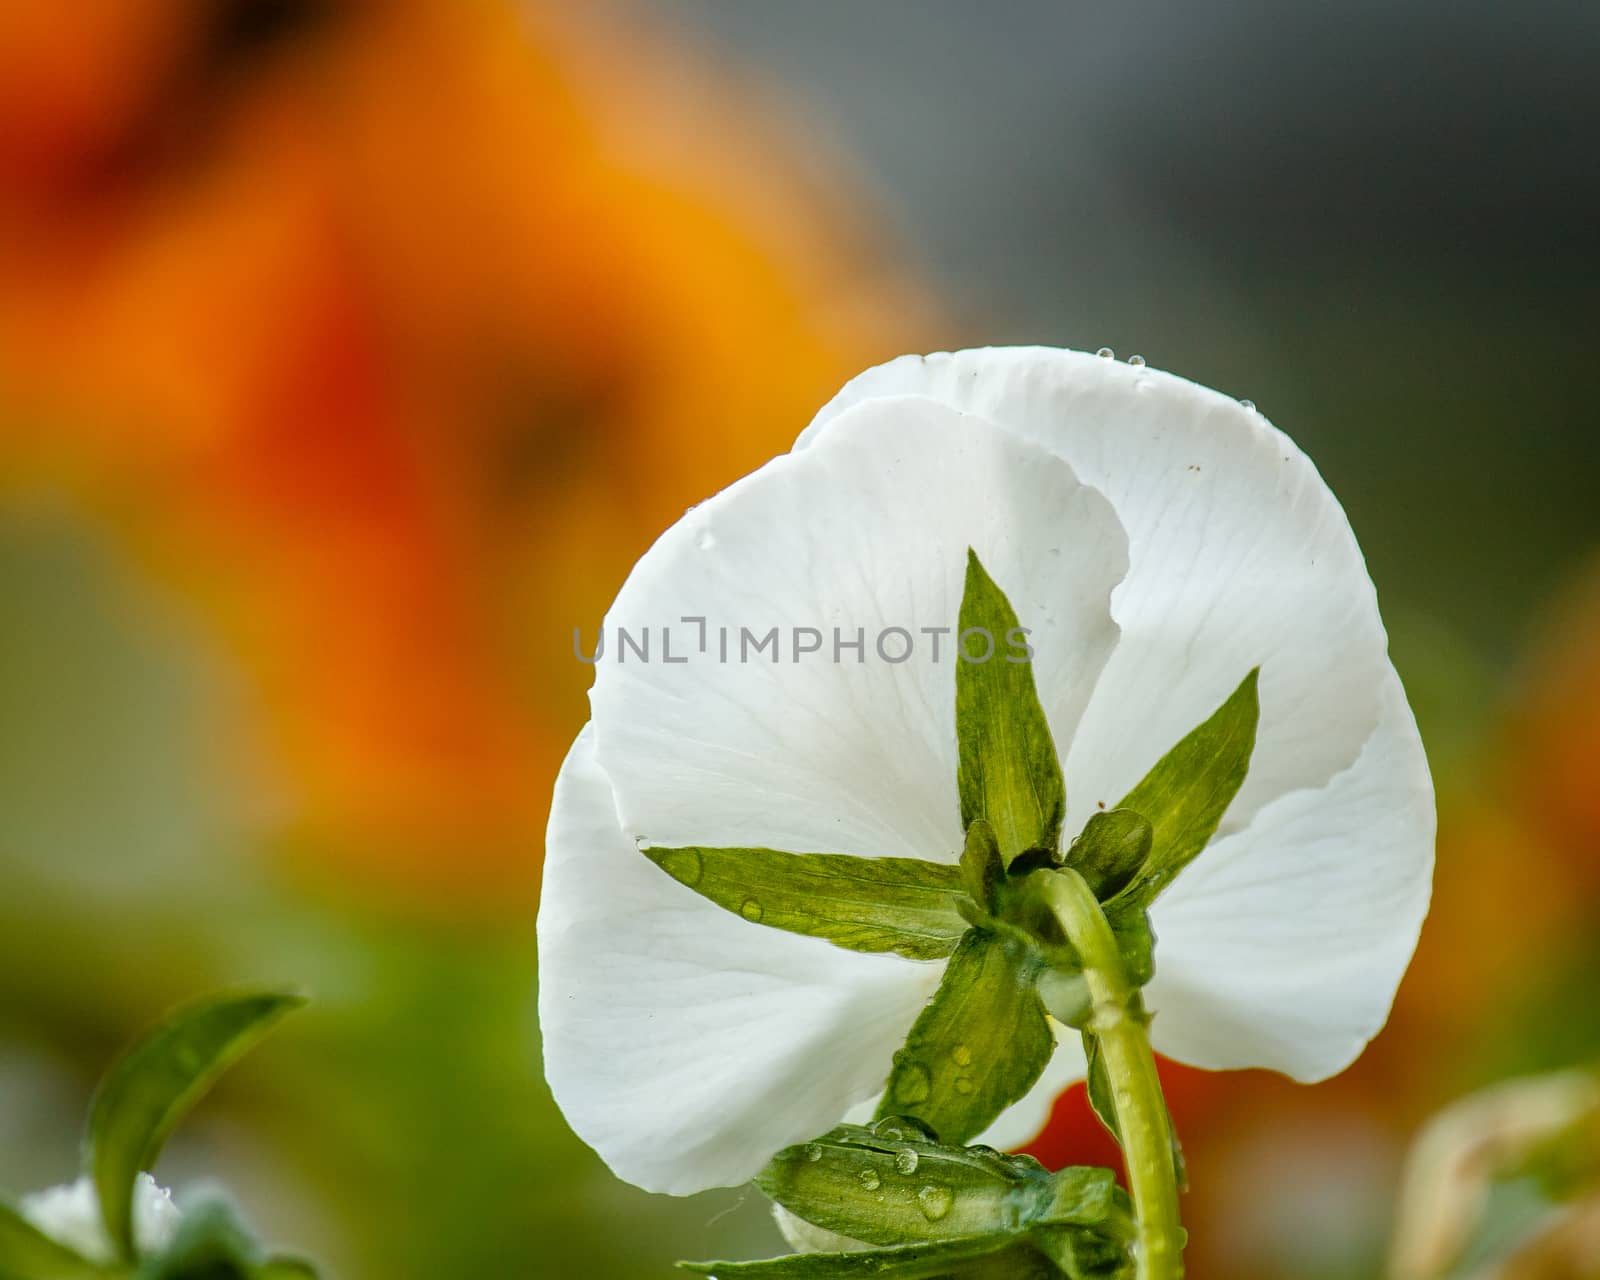 A very different view looking at this beautiful white poppy from behind. There are drops of water of the flower and the background gives a lovely colorful contrast and really makes the flower stand out.